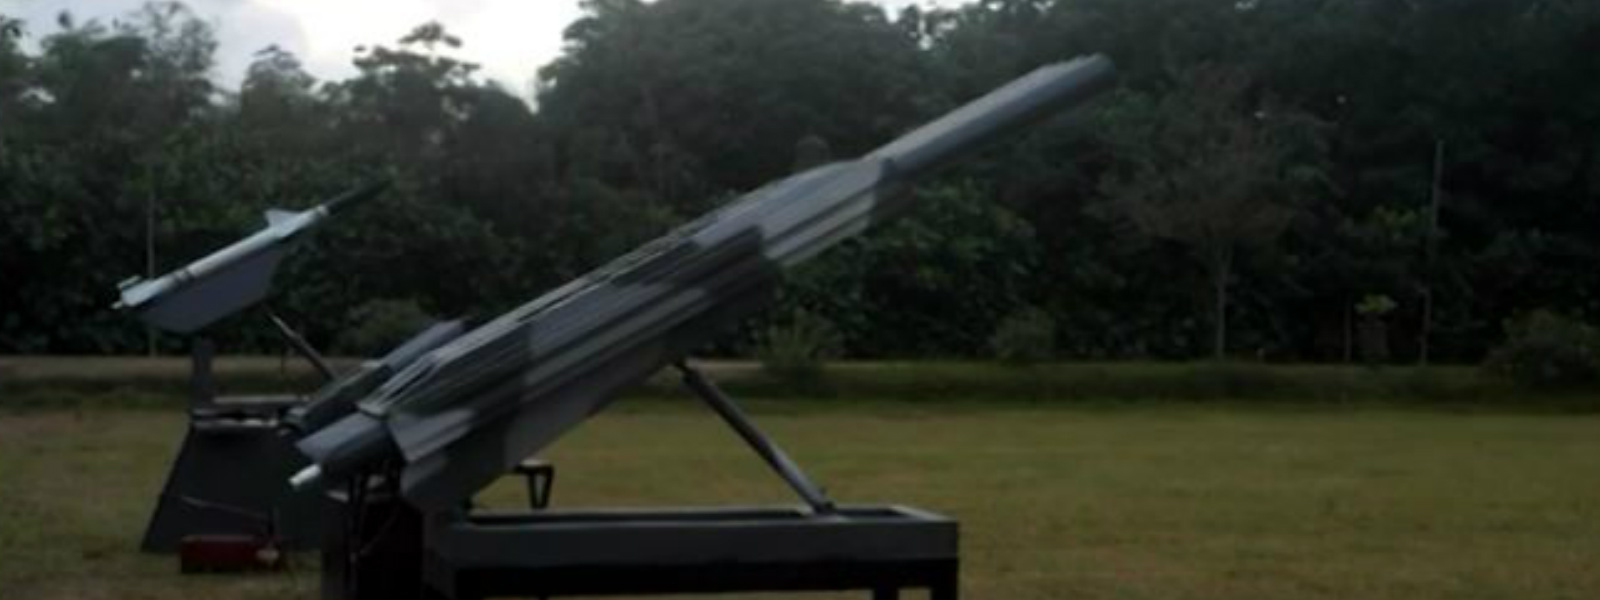 First ever missile produced in SL on display today